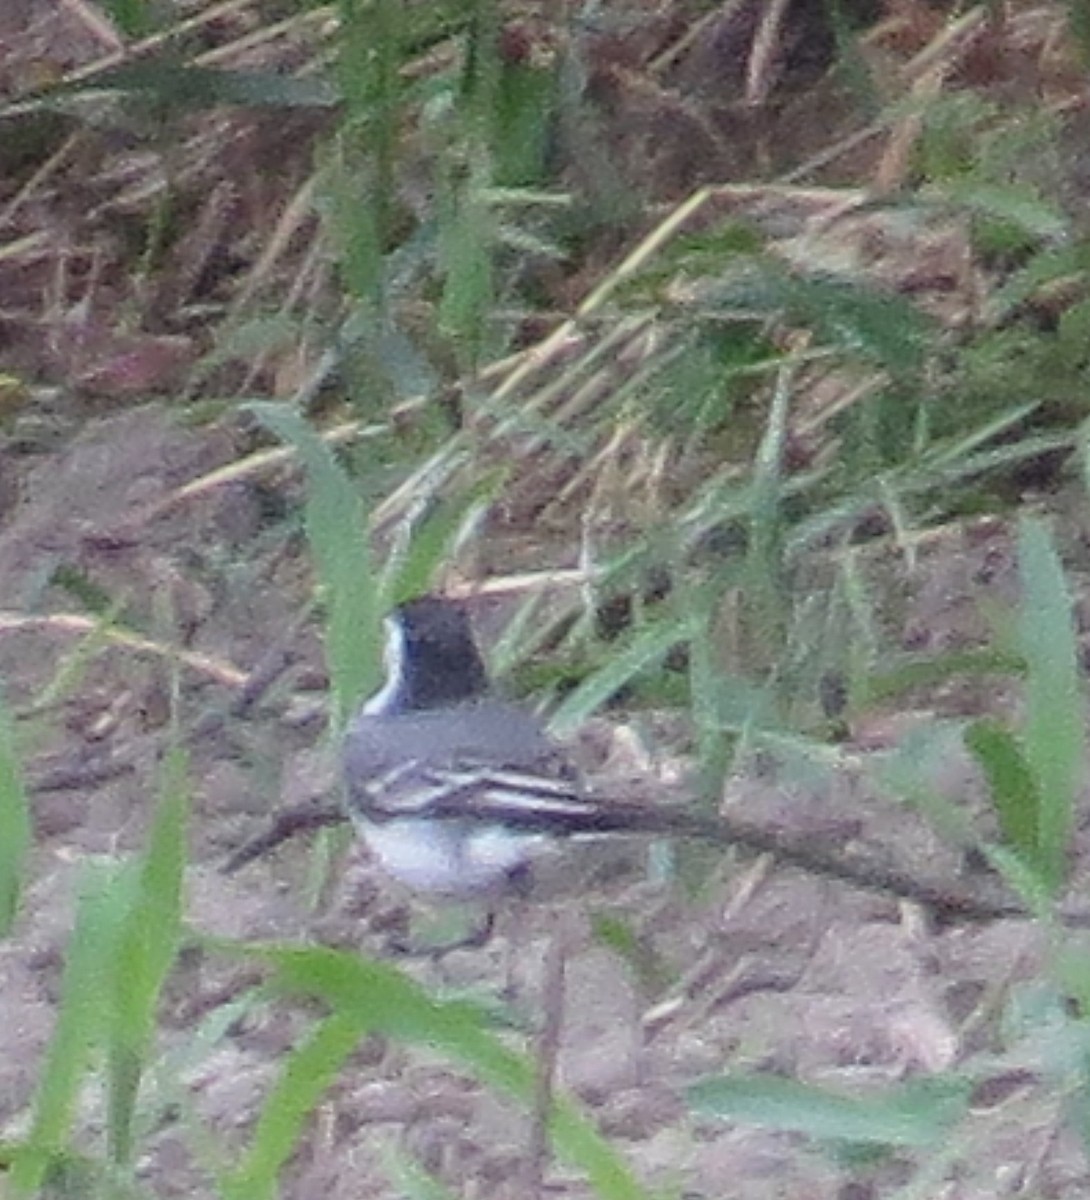 White Wagtail - valerie heemstra